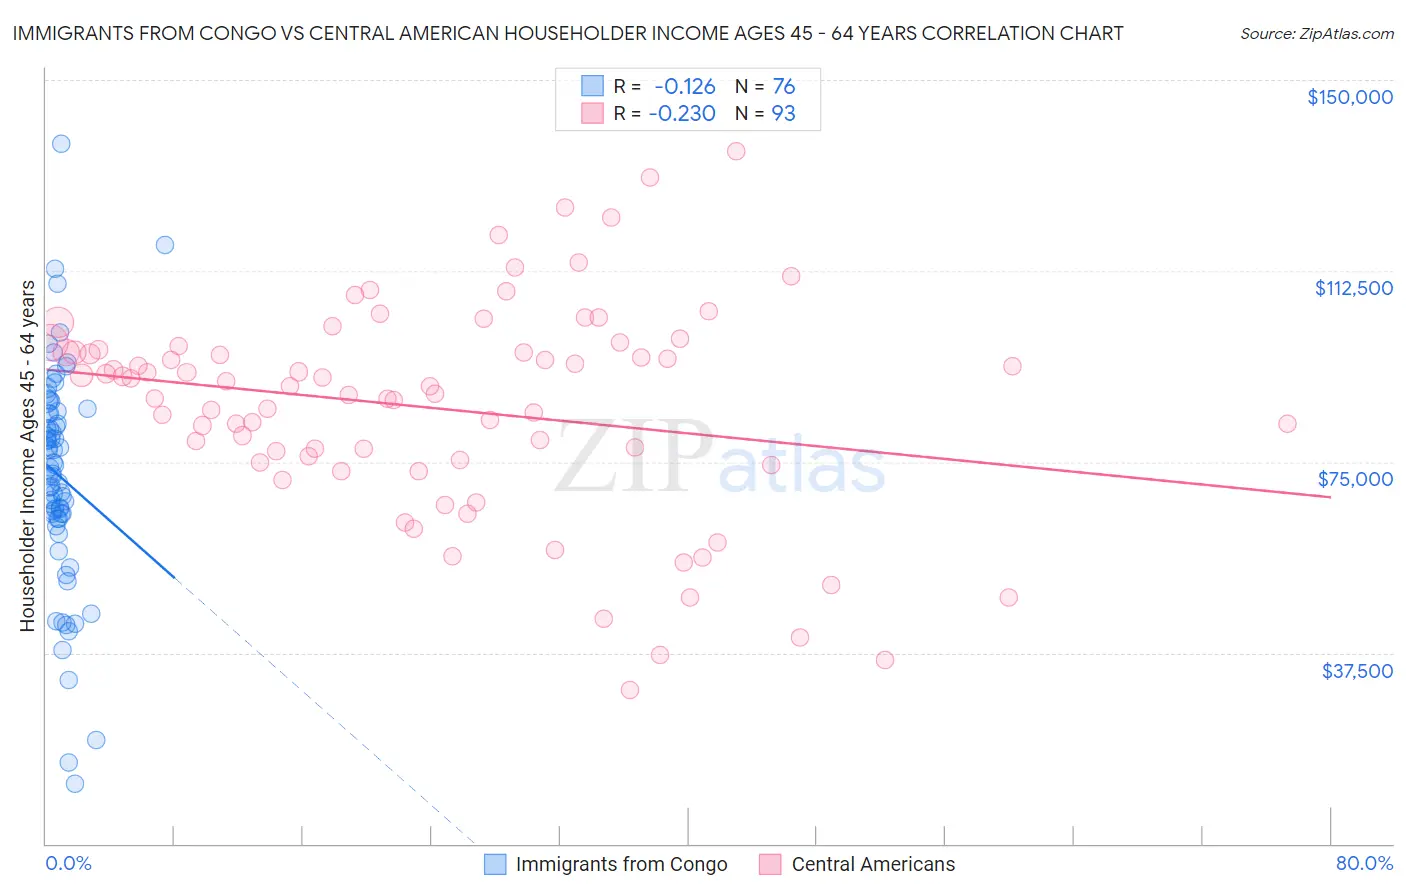 Immigrants from Congo vs Central American Householder Income Ages 45 - 64 years